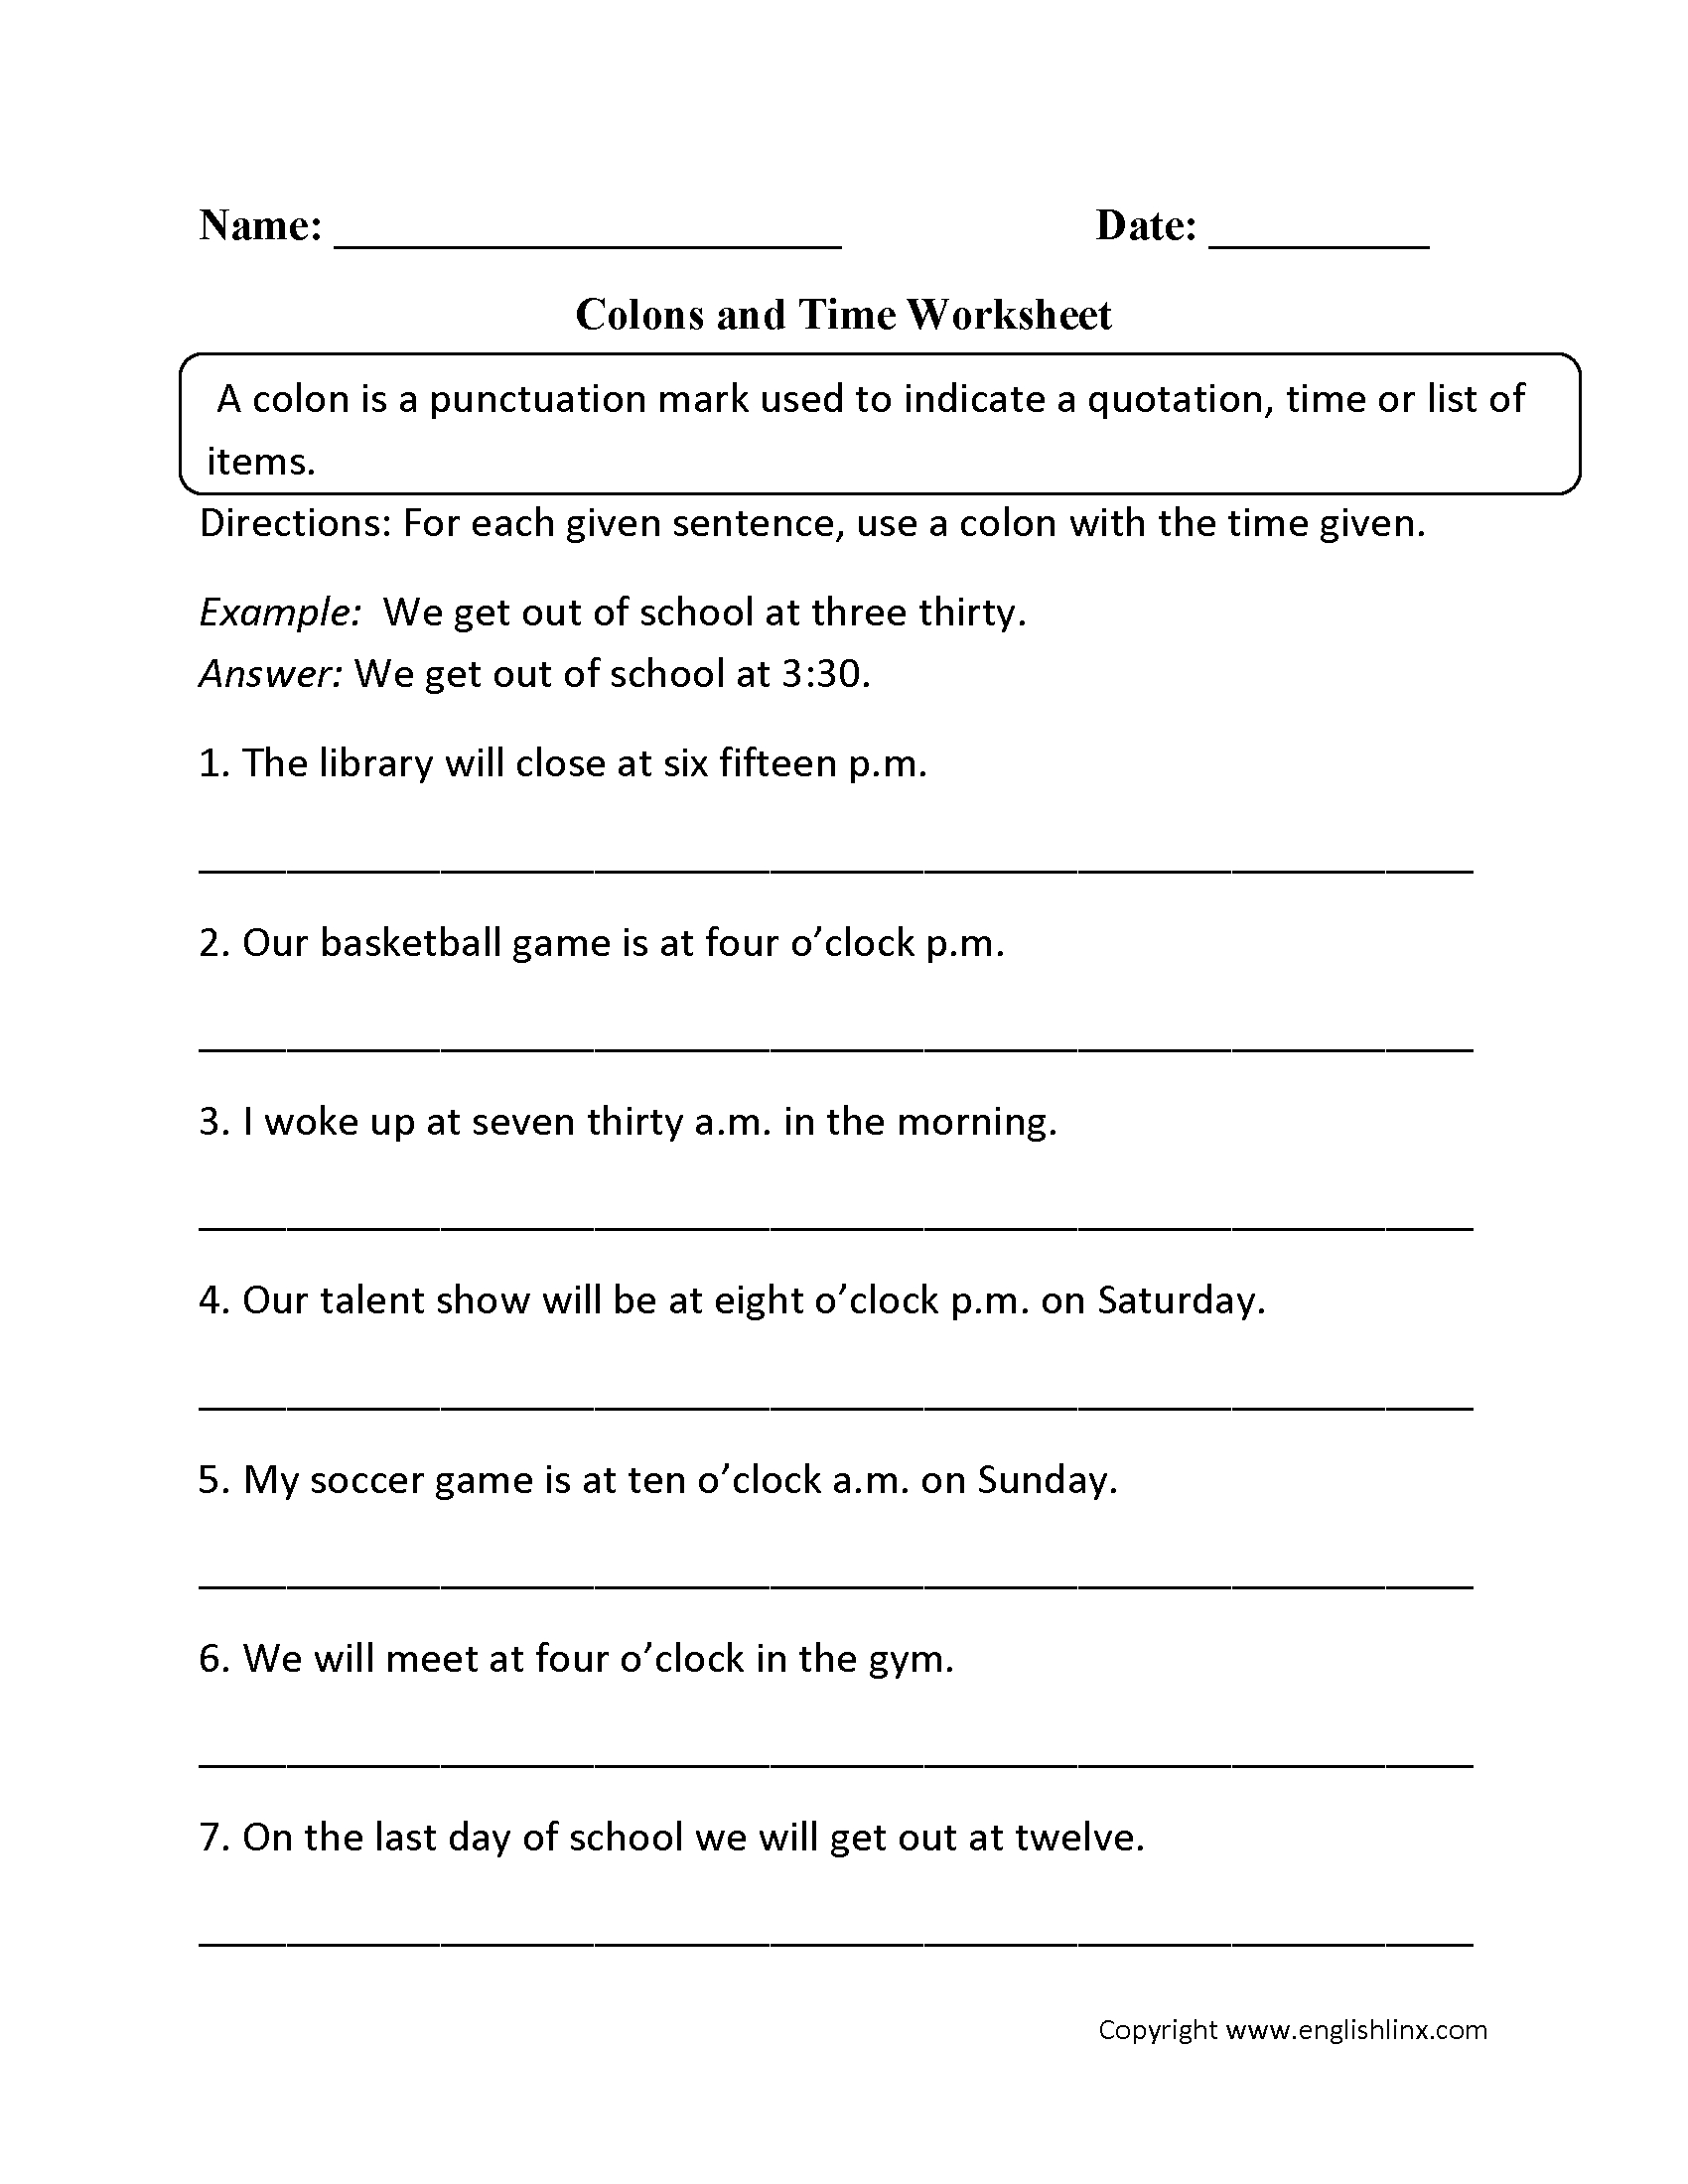 Punctuation Worksheets | Colon Worksheets - Free Printable 5 W's Worksheets